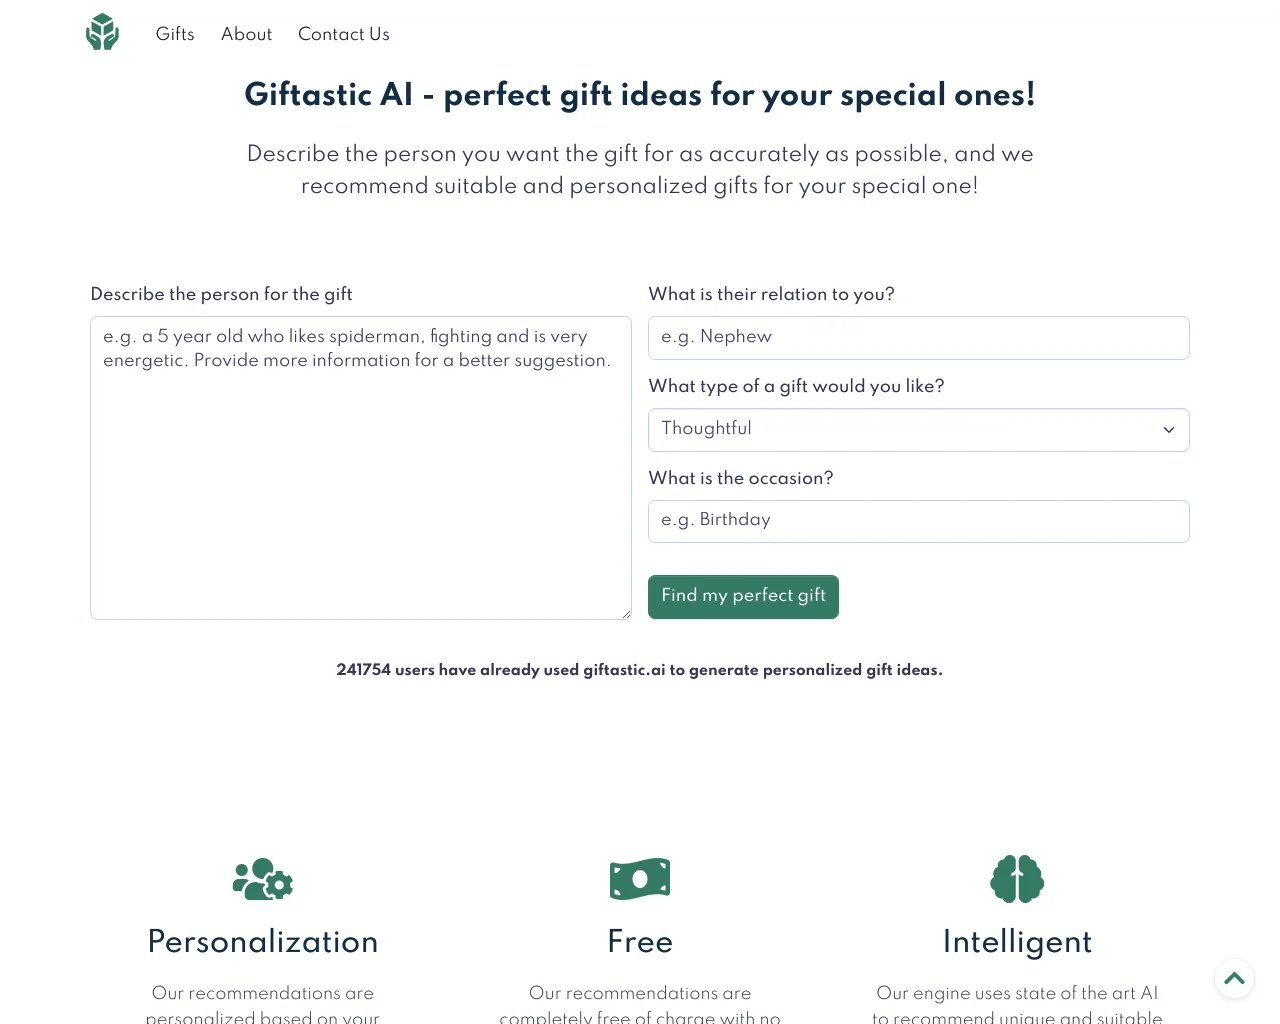 Giftastic.Ai - Perfect Gift for Your Special One!